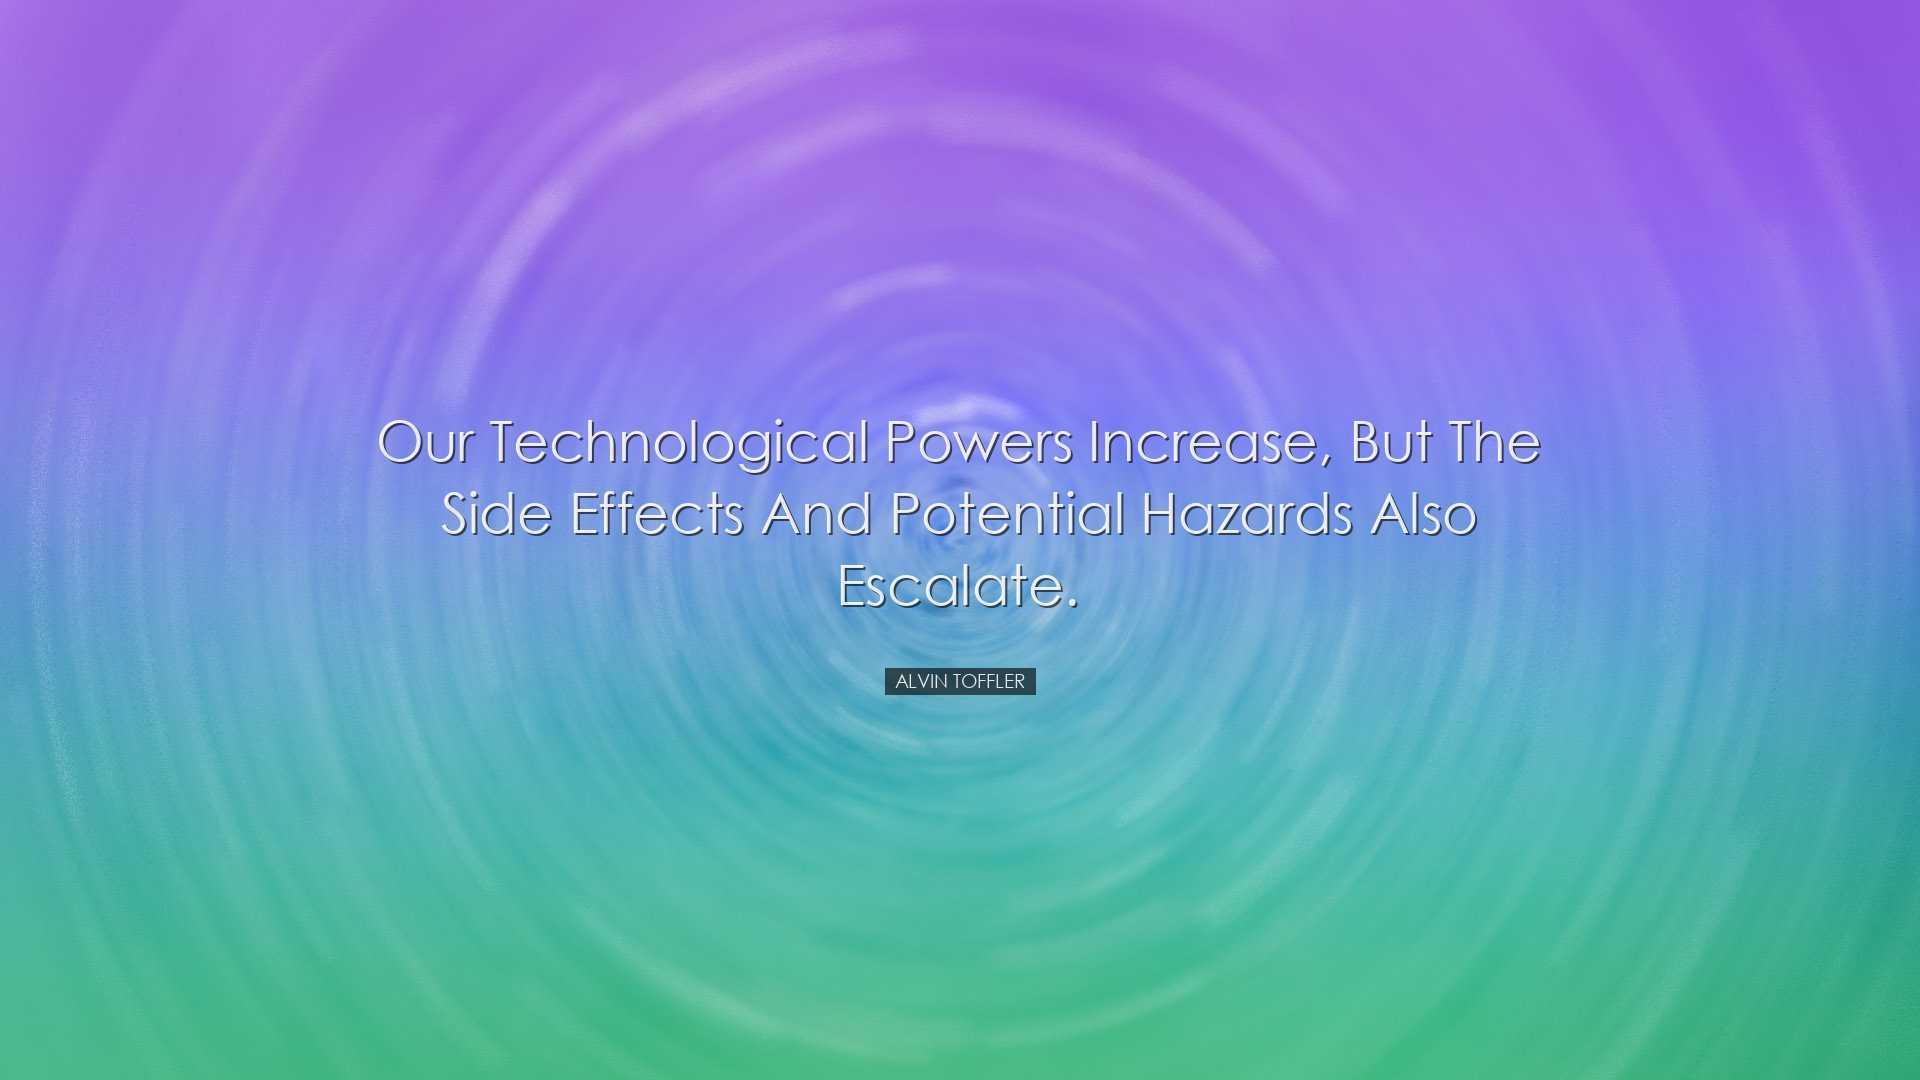 Our technological powers increase, but the side effects and potent